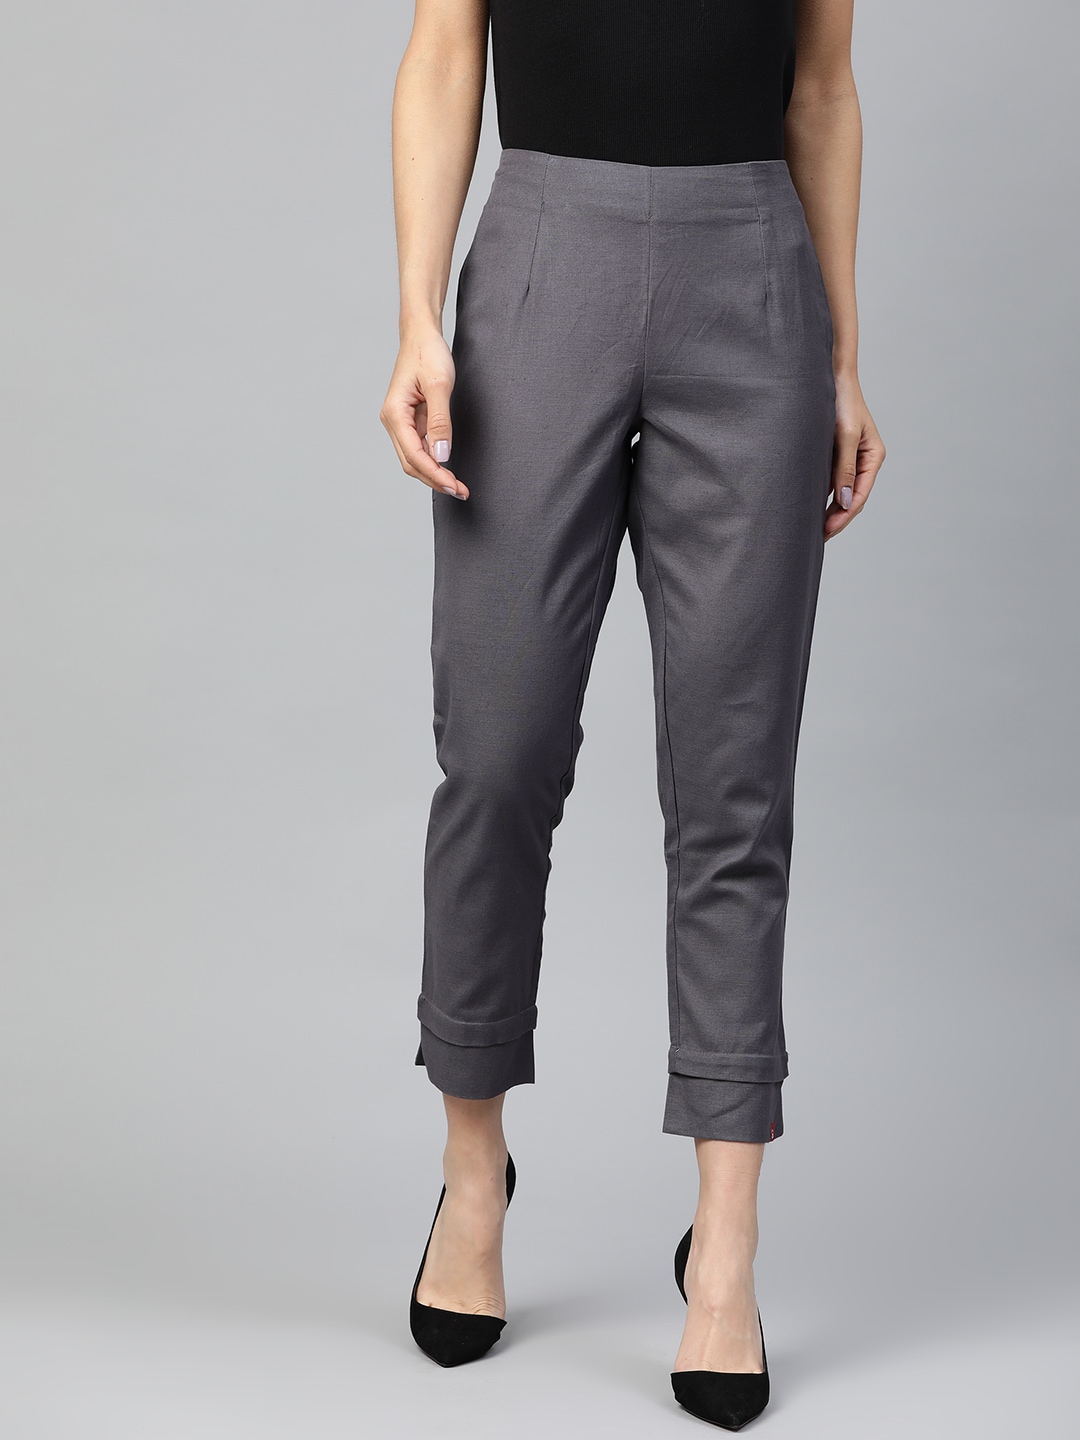 Biba Women Charcoal Grey Slim Fit Solid Regular Cropped Trousers Price in India